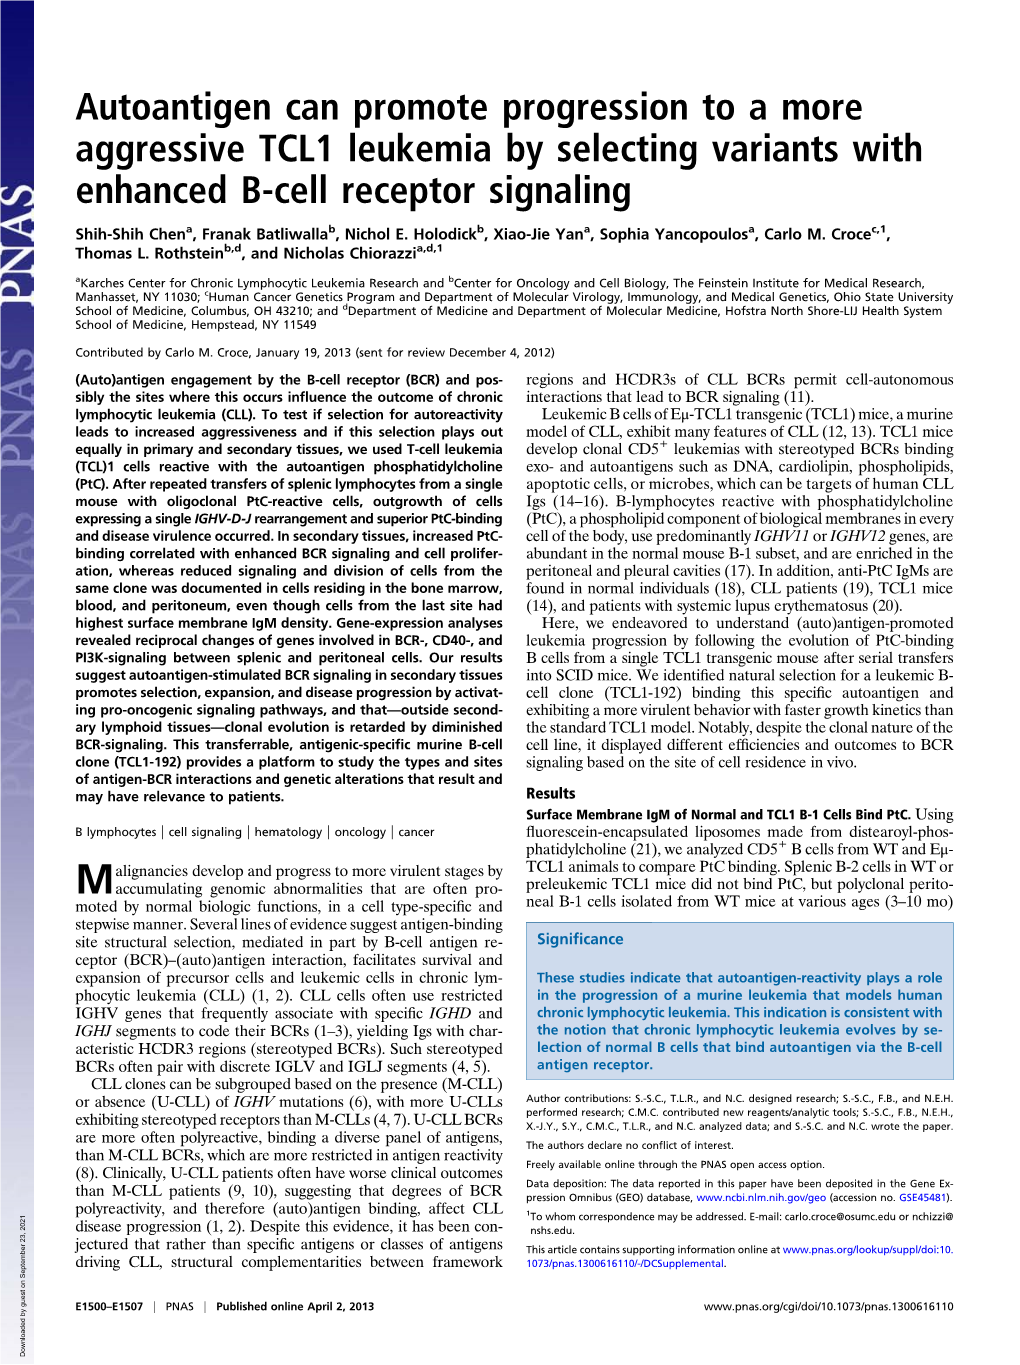 Autoantigen Can Promote Progression to a More Aggressive TCL1 Leukemia by Selecting Variants with Enhanced B-Cell Receptor Signaling